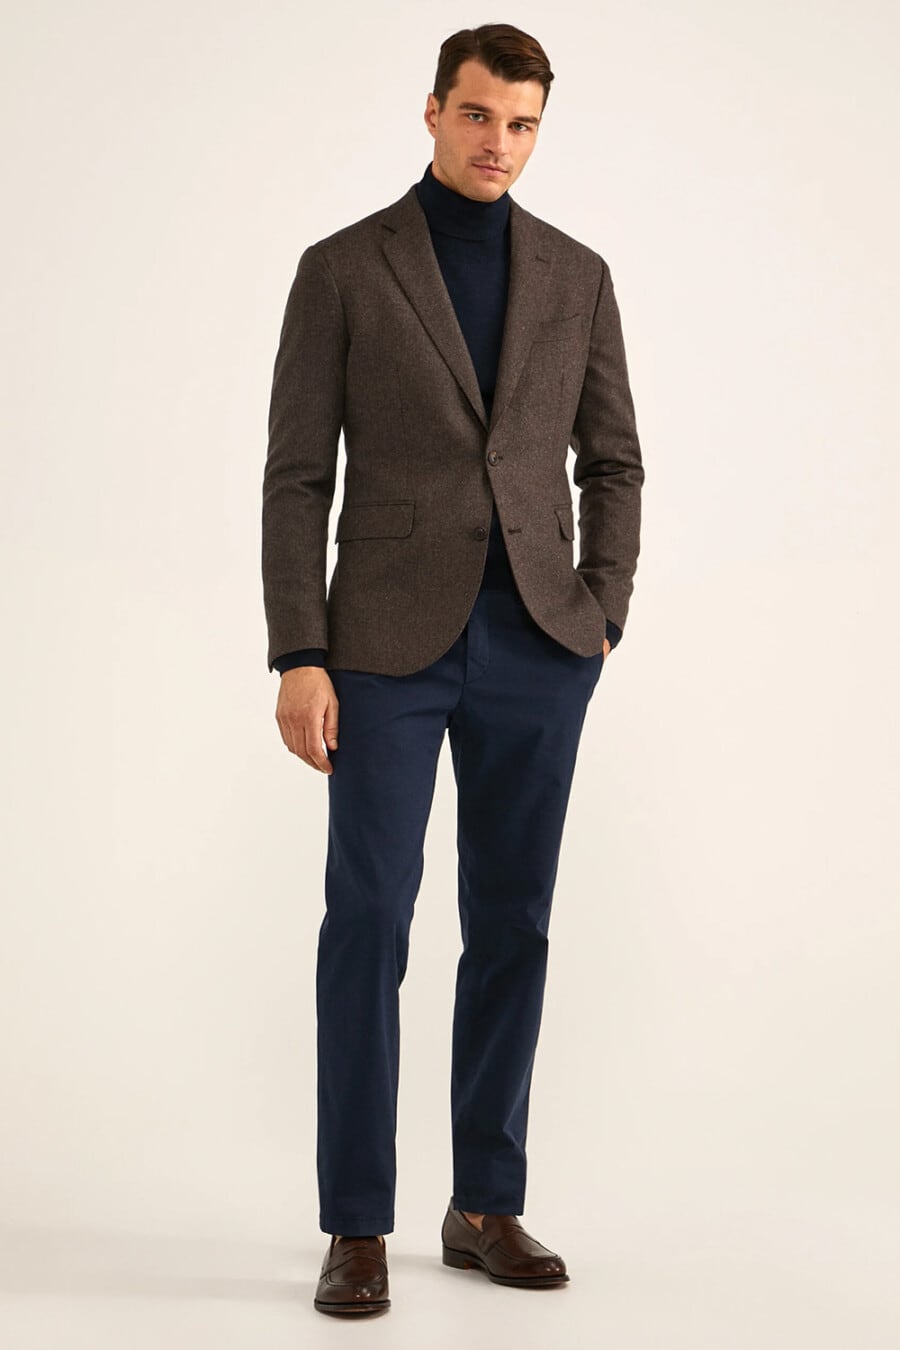 Men's navy cinos, navy turtleneck, brown wool blazer and brown leather penny loafers business casual outfit